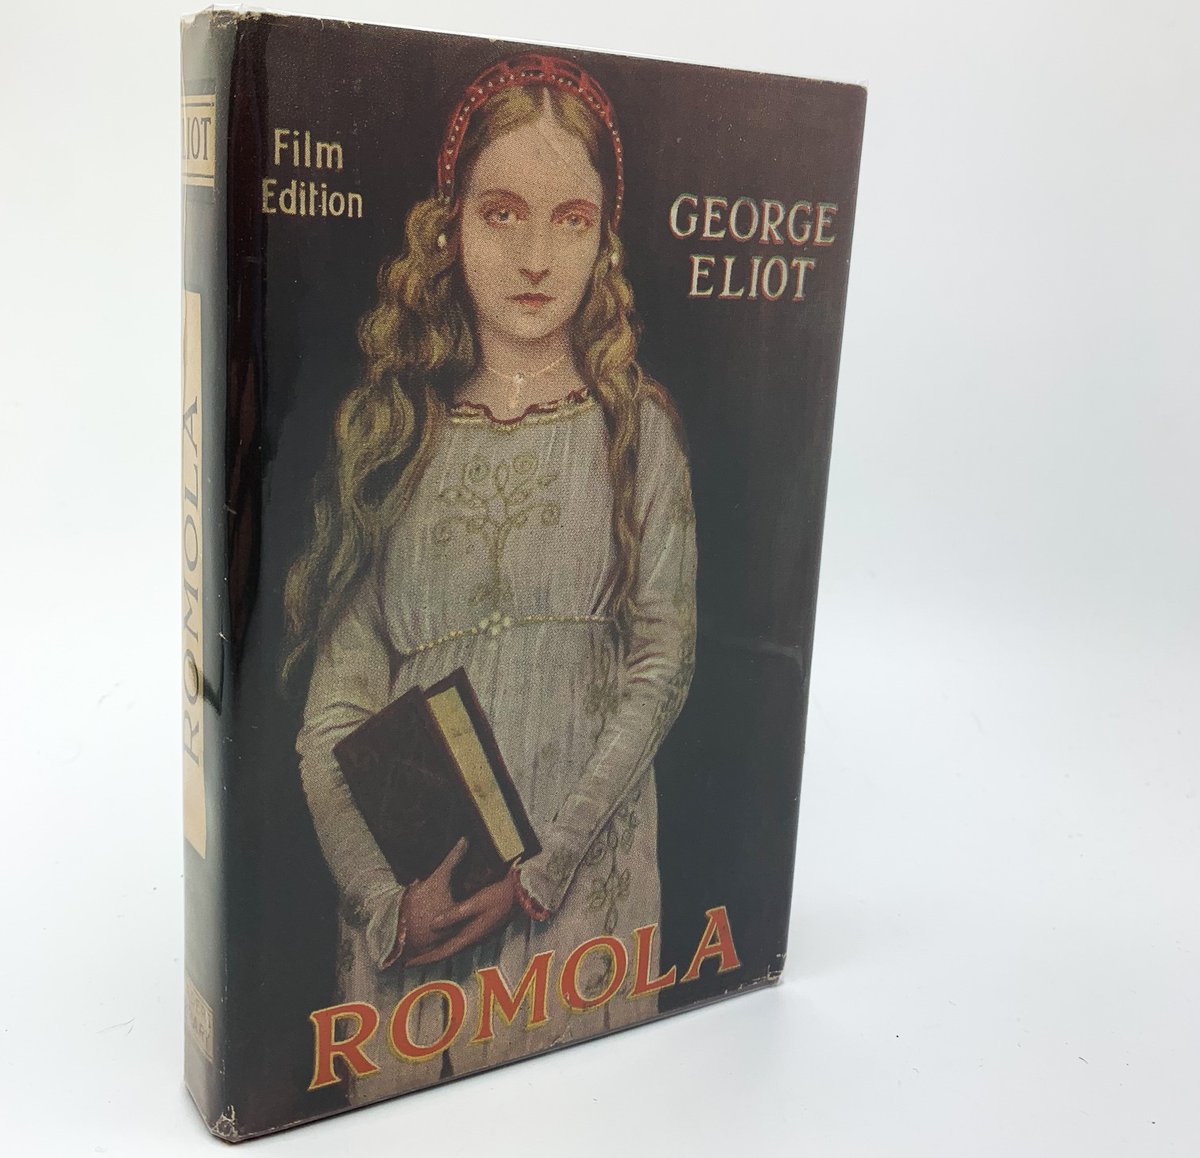 George Eliot's Romola is worth considering if you like historical fiction. Set in Renaissance Florence, the novel focuses on Tito Melema, an untrustworthy politician, & his wife Romola. Many key figures from the era are featured, including Machiavelli. bddy.me/3kFVFWl